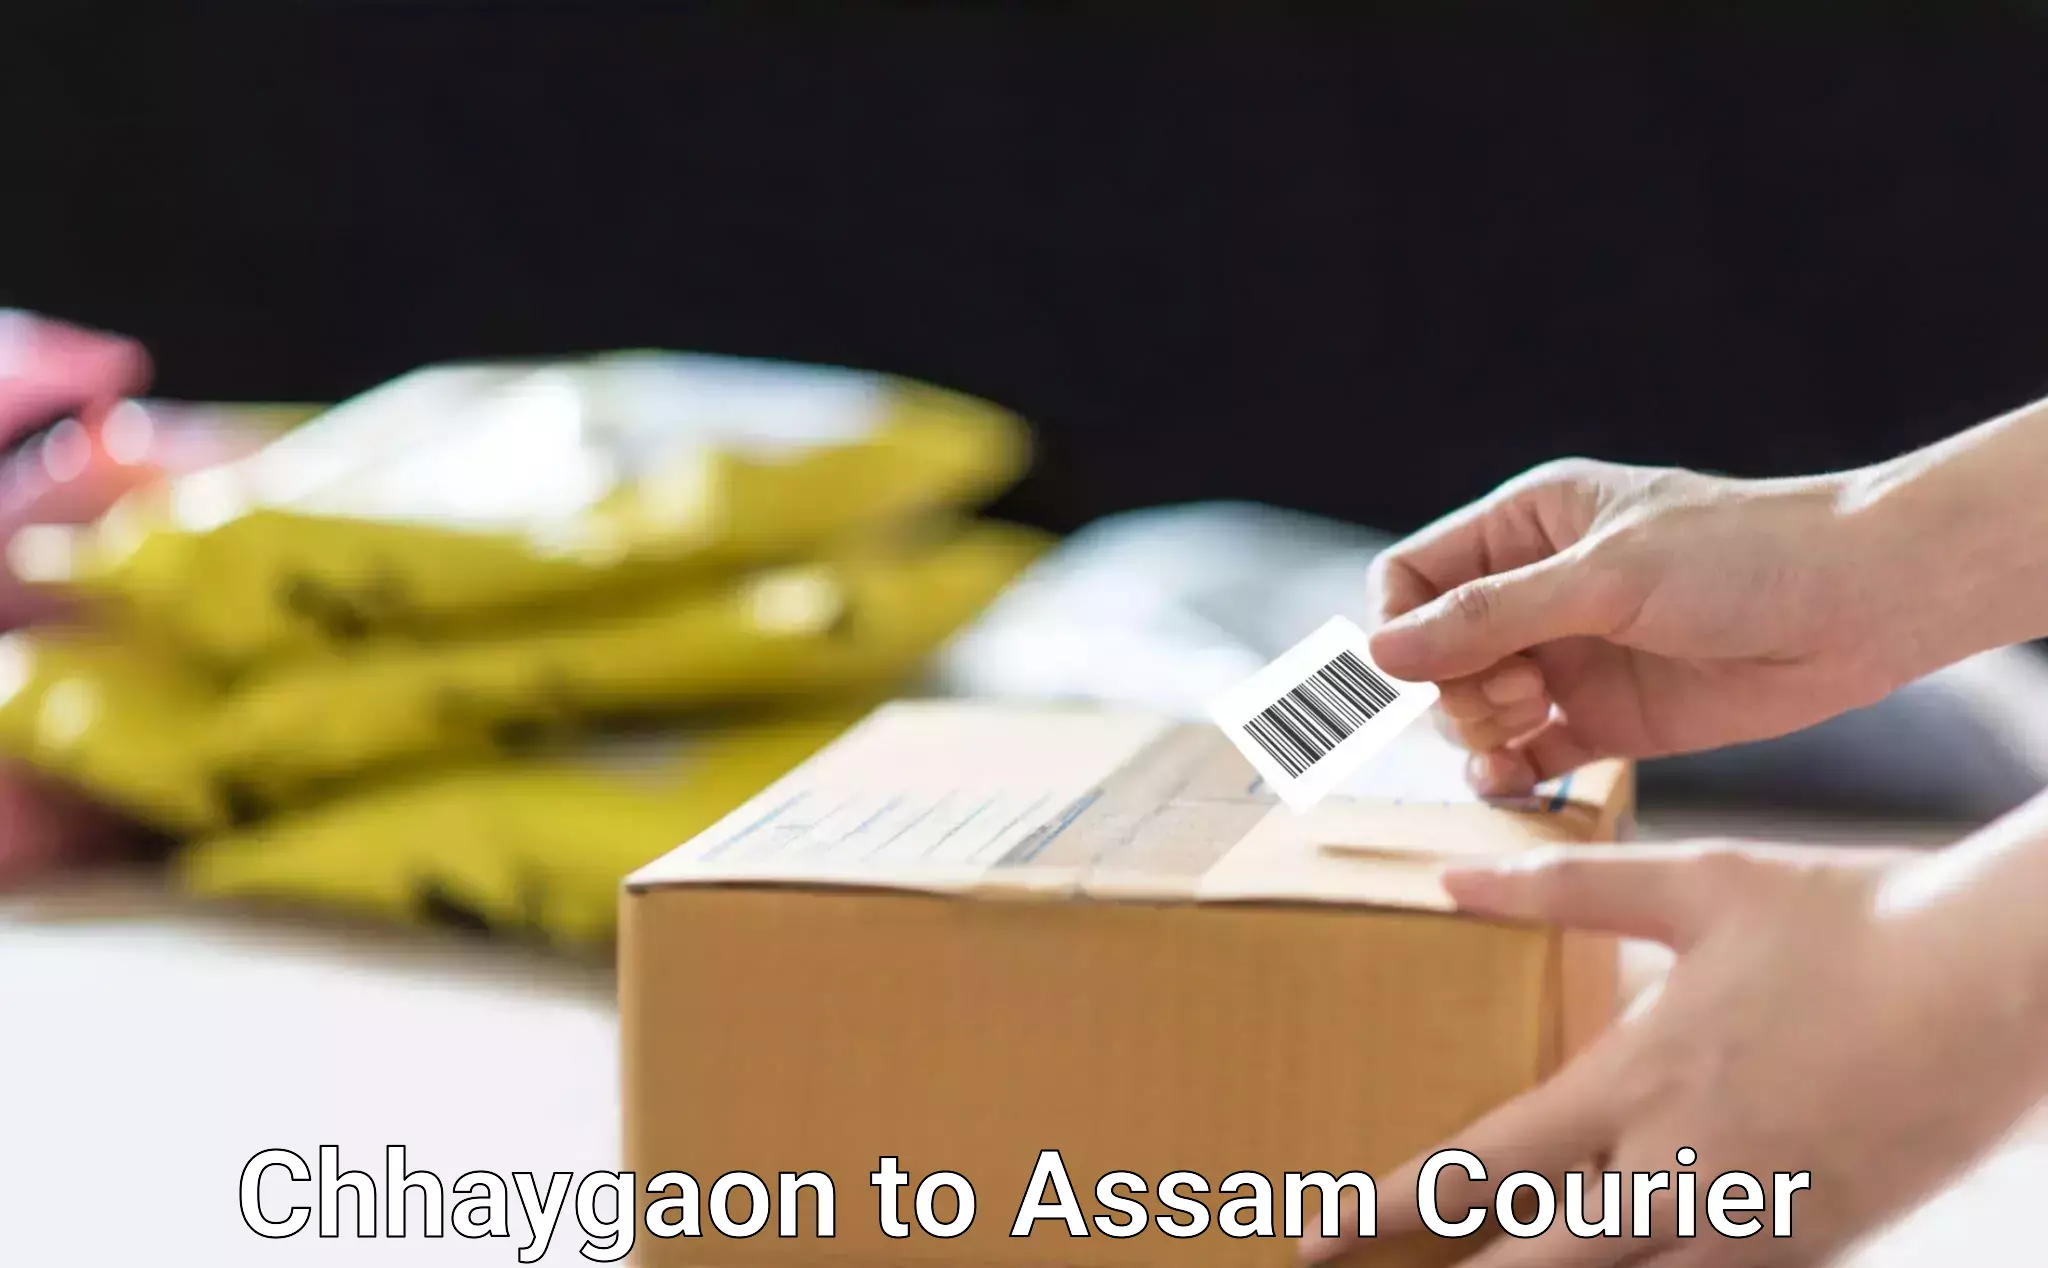 Subscription-based courier Chhaygaon to Pathsala